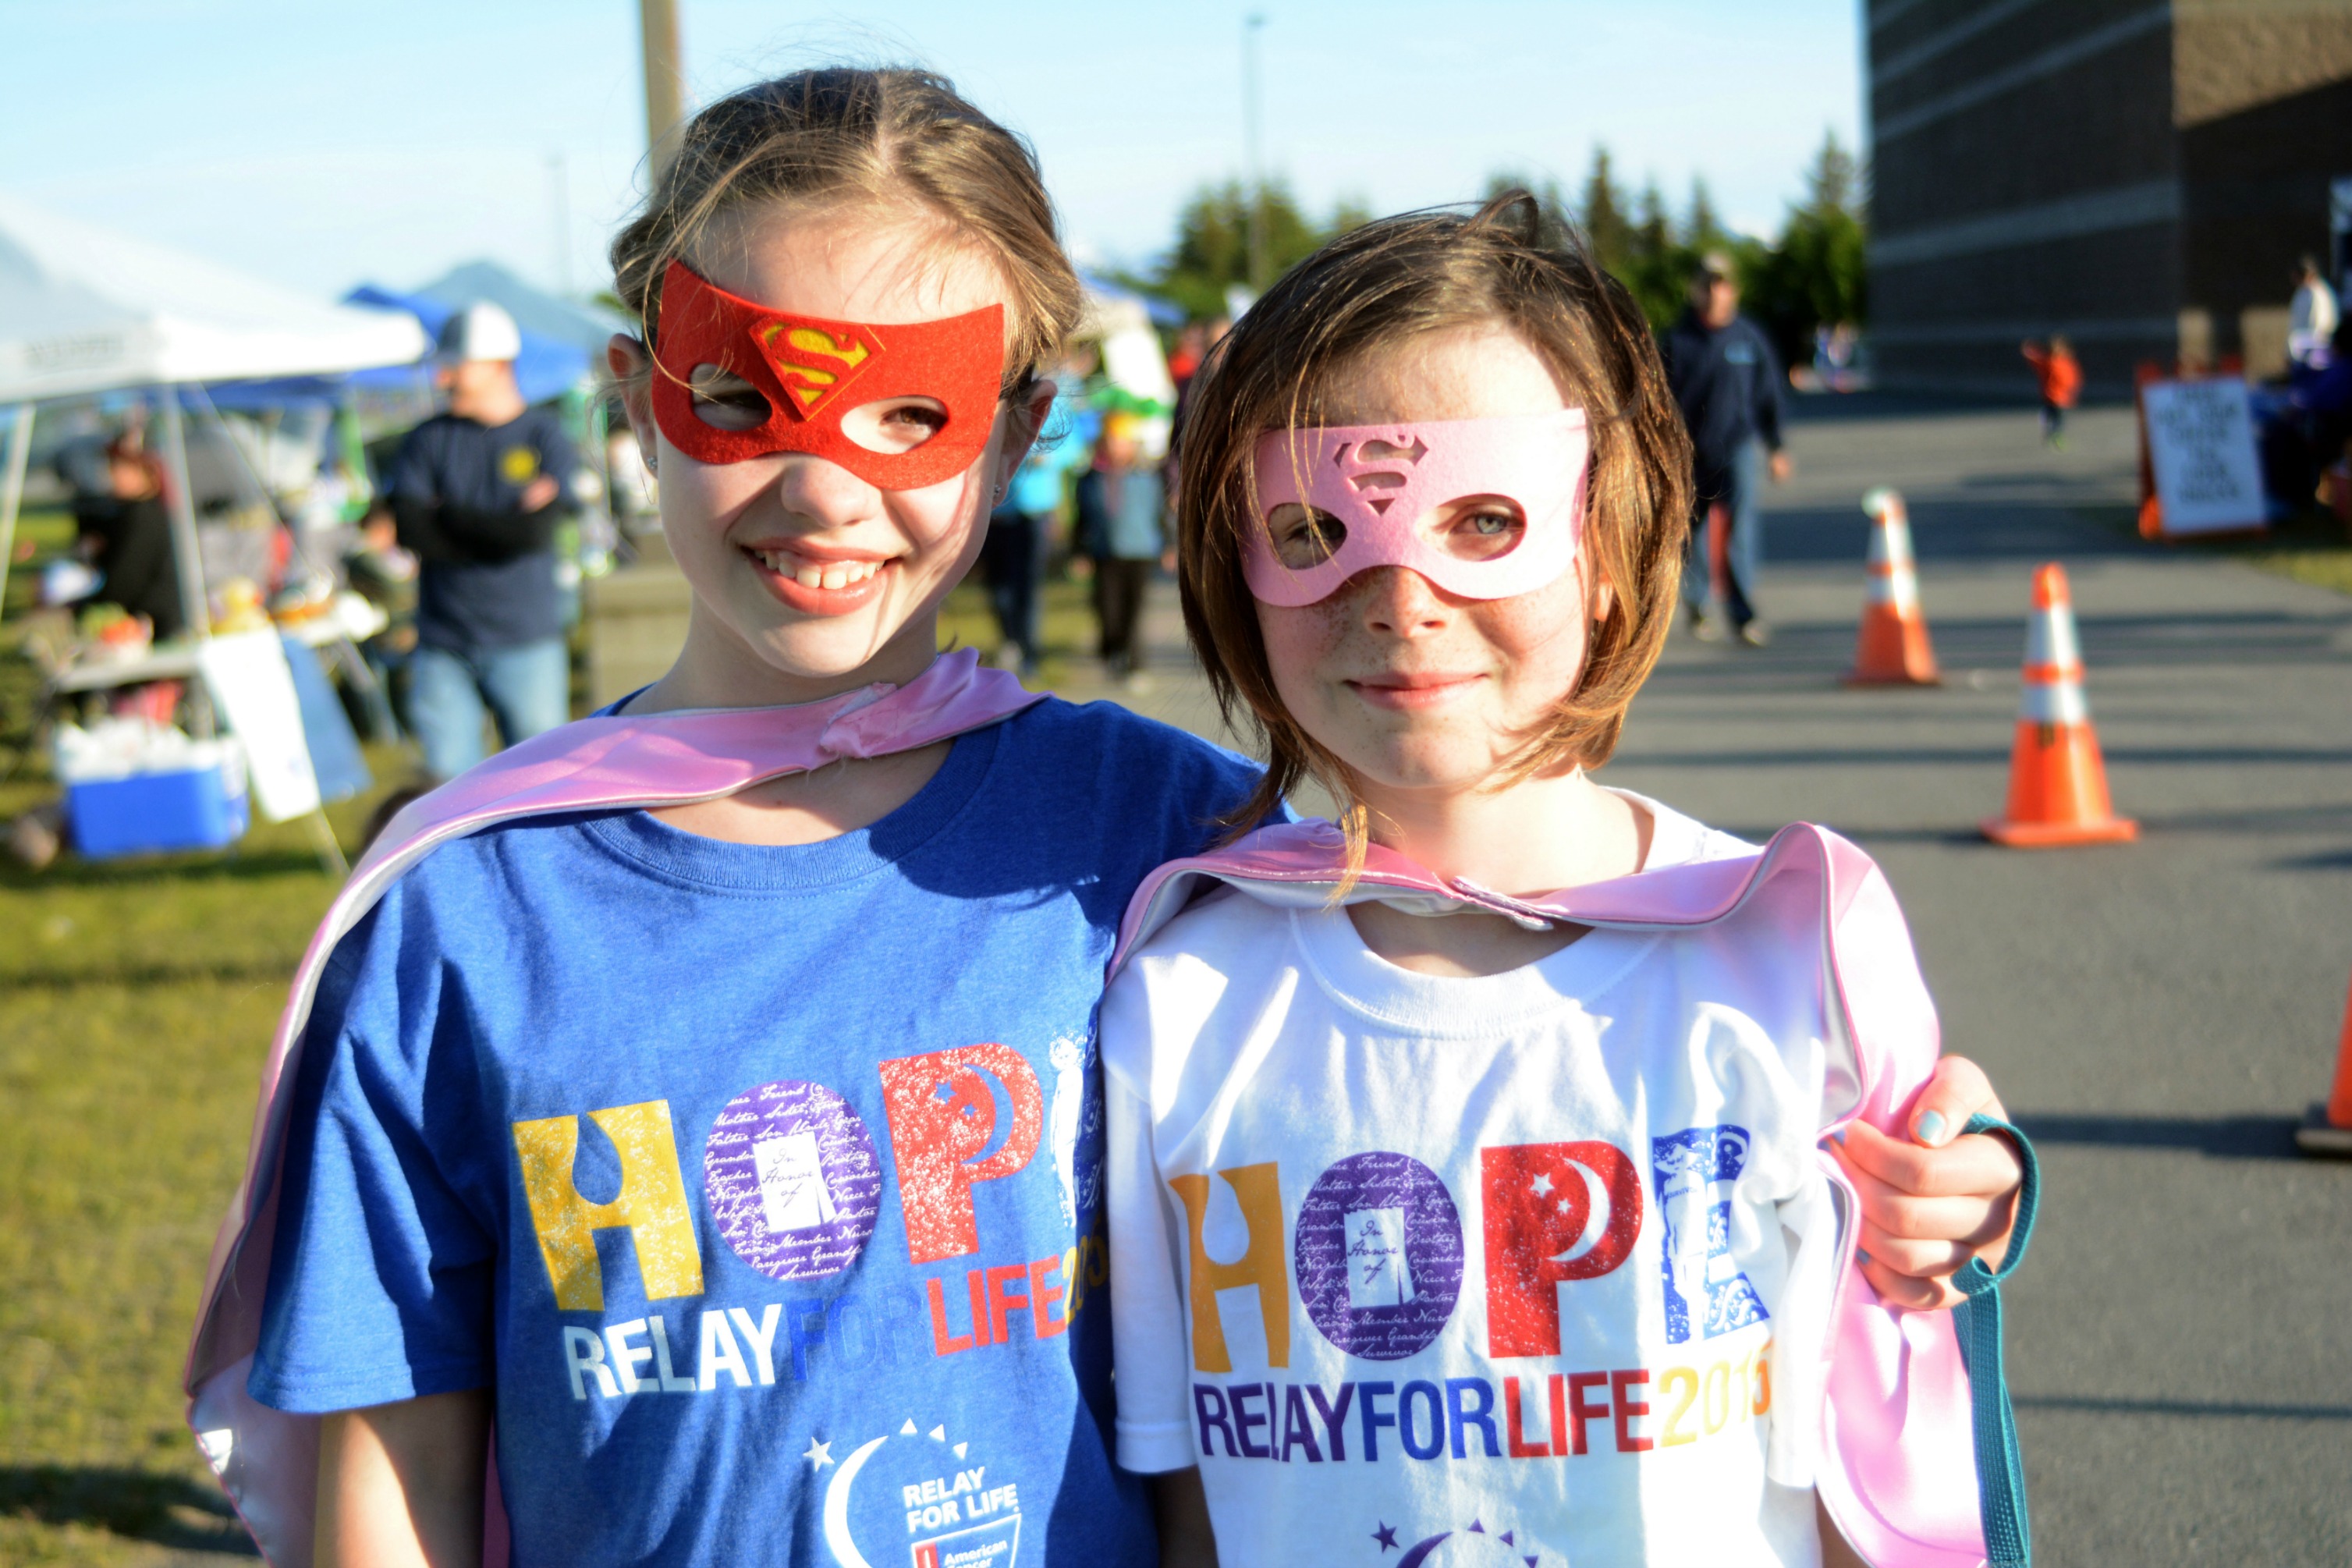 Sophia Park, left, and Neviya Reed of Team Puppies pause for a photo during the 2015 Relay for Life.